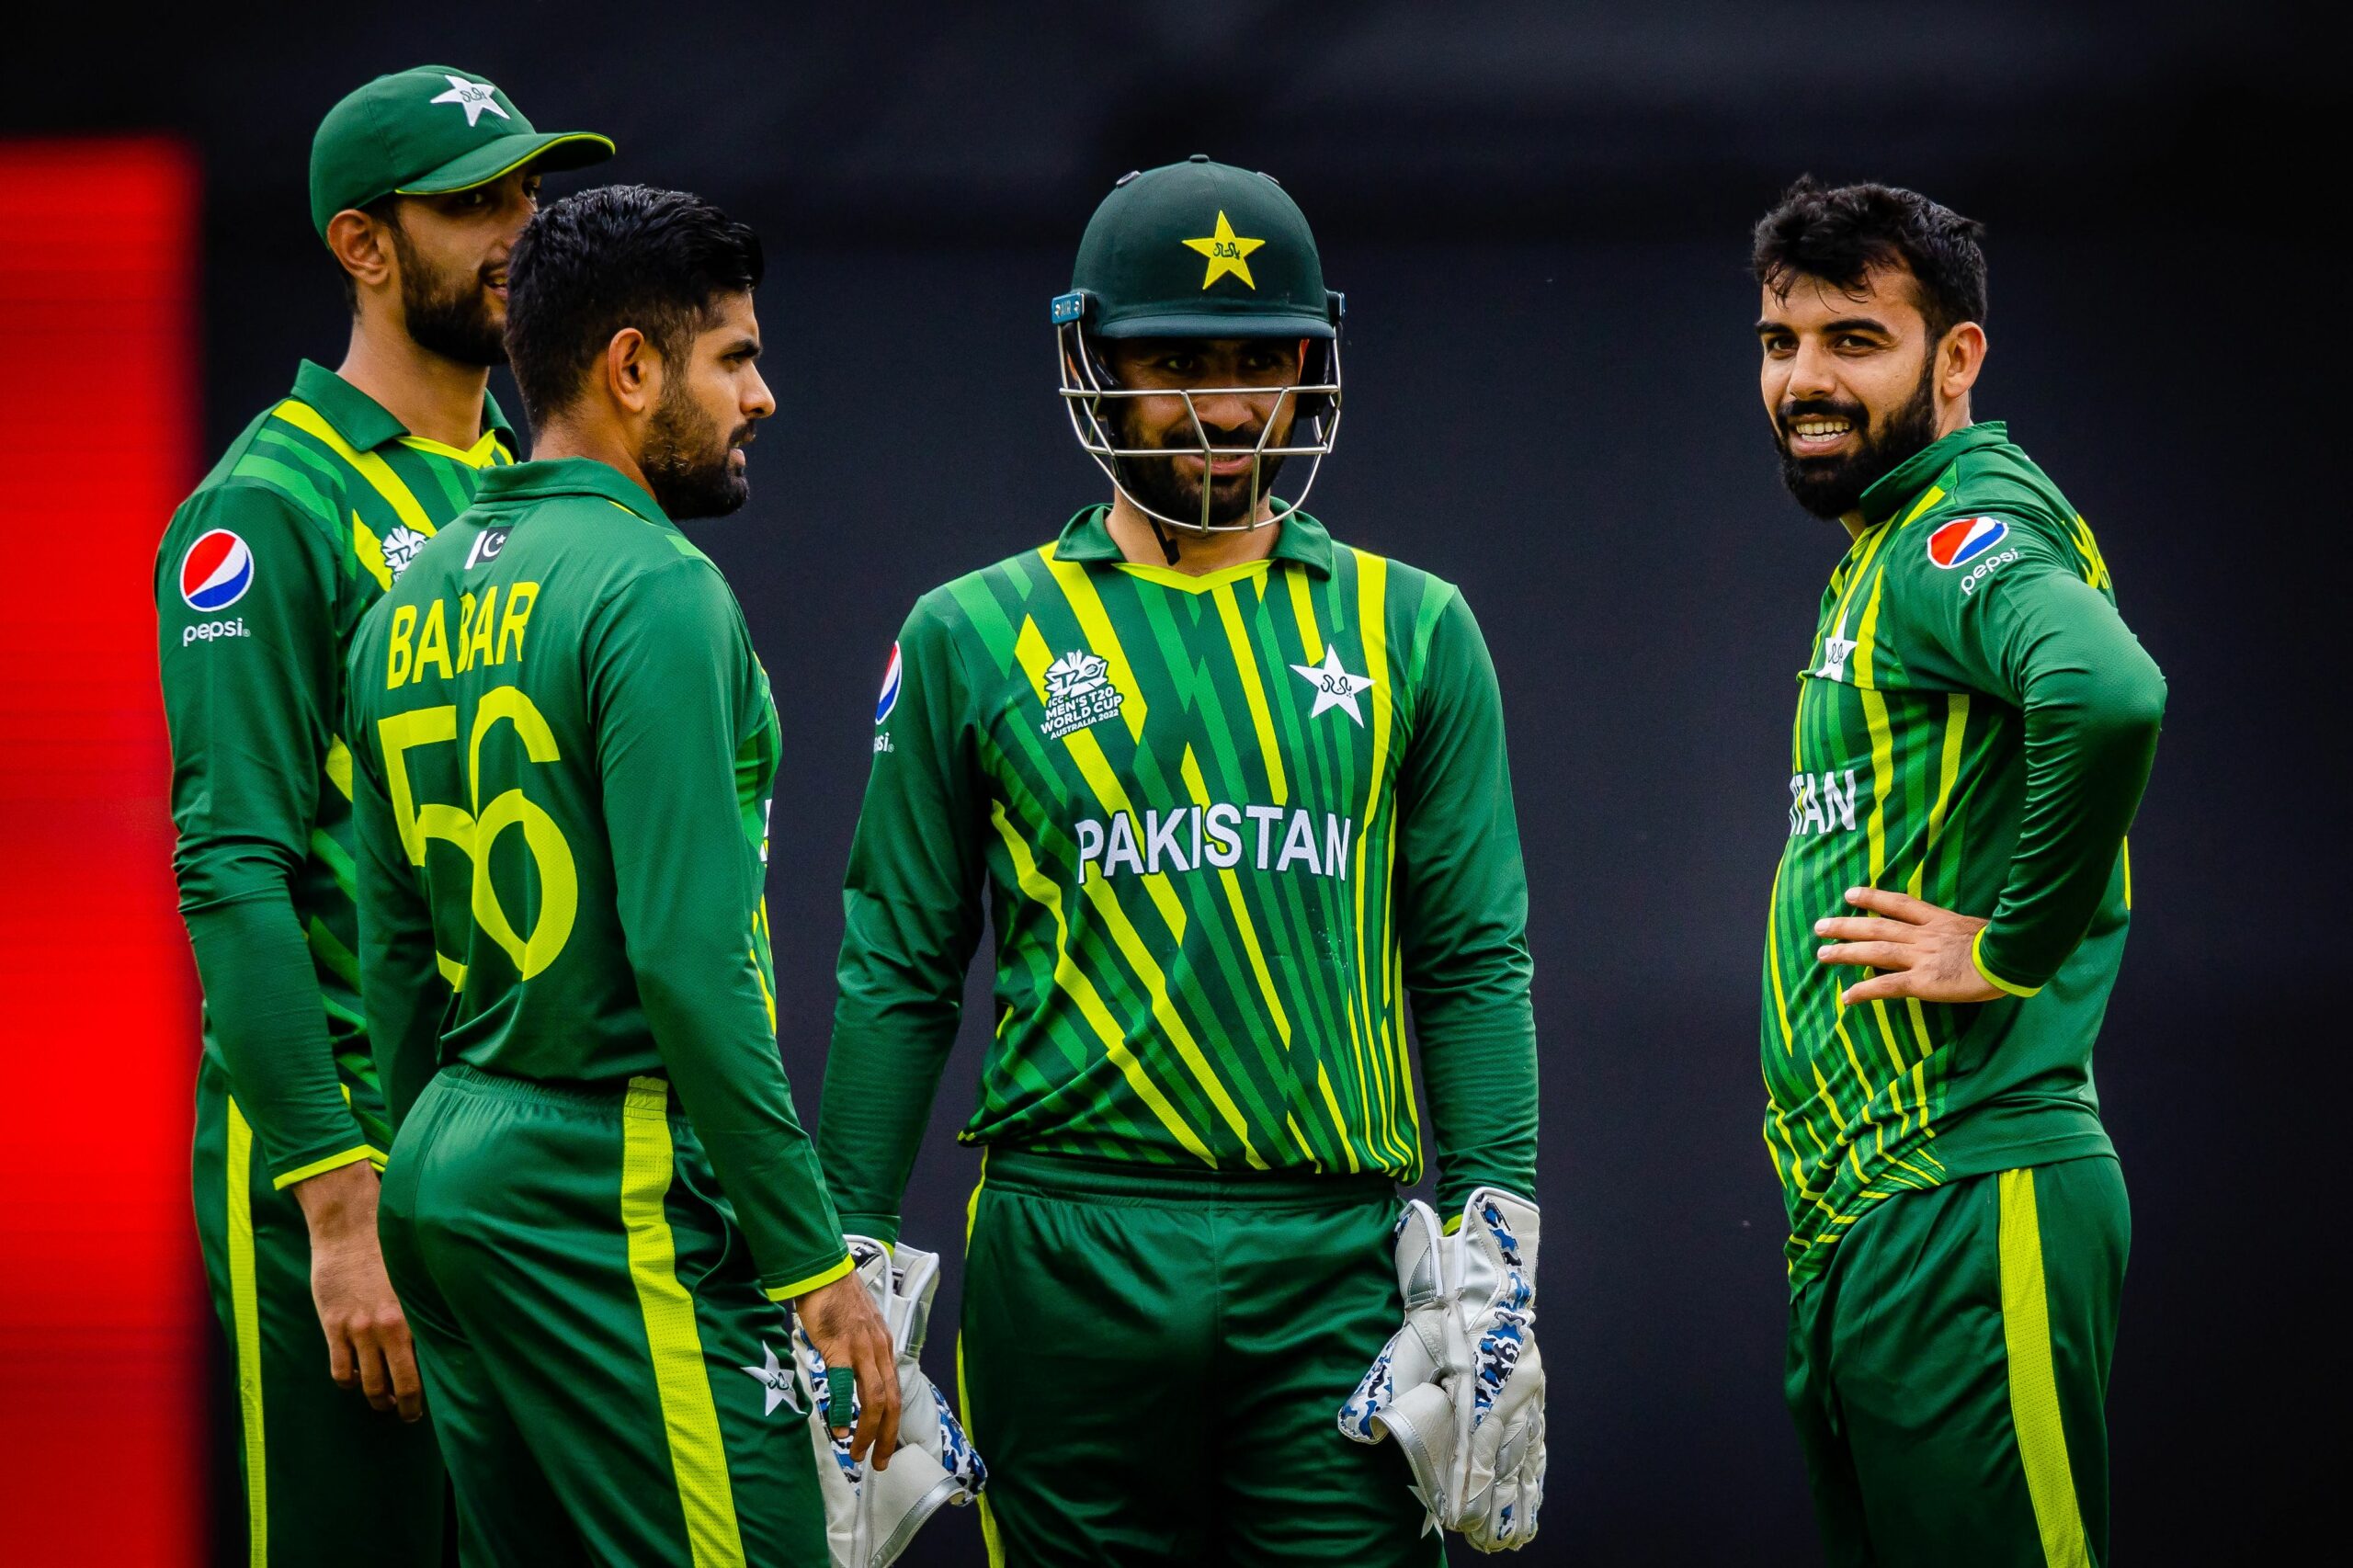 Pakistan to undergo significant changes ahead of the World Cup